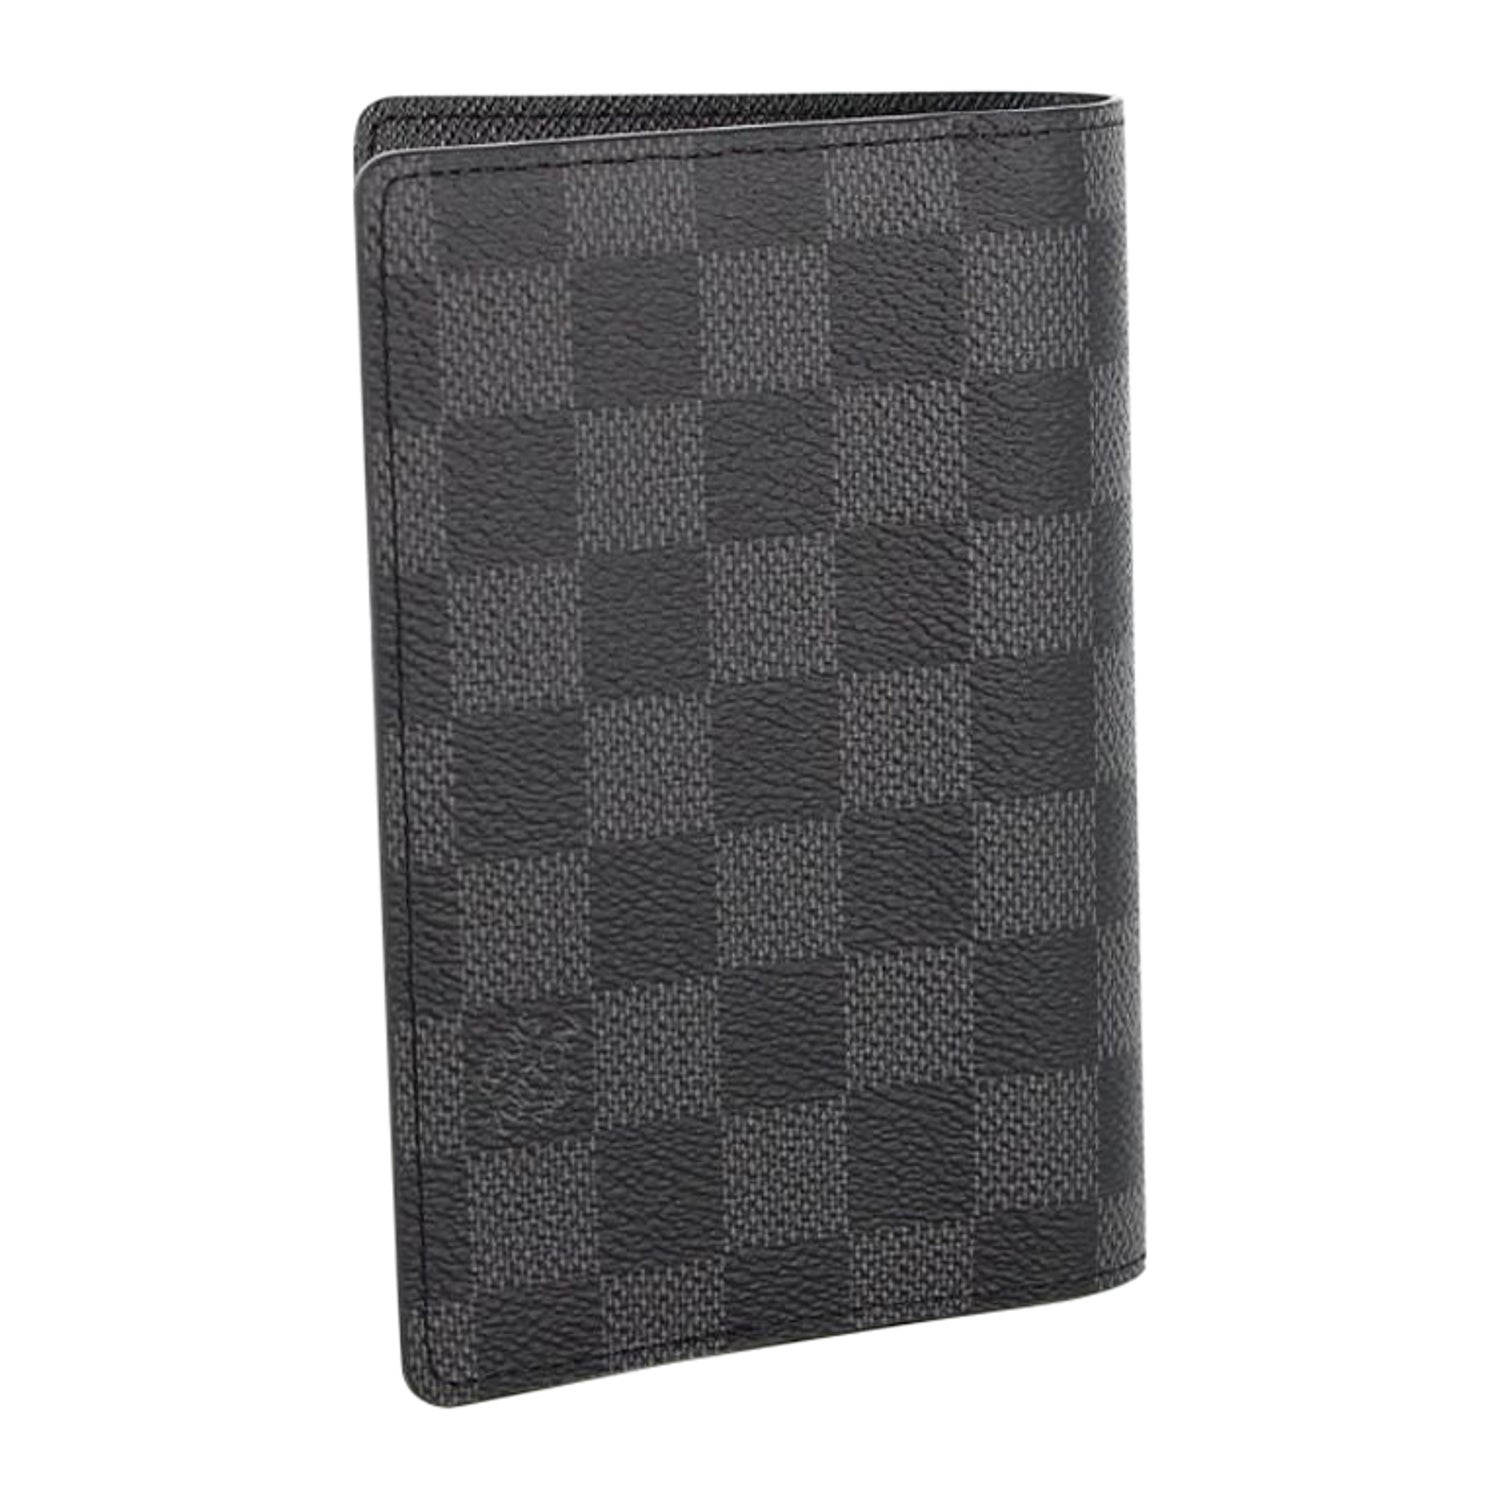 New in Box Louis Vuitton Limited Edition Paris Passport Cover at 1stDibs  louis  vuitton passport holder limited edition, paris passport holder, louis  vuitton paris passport cover